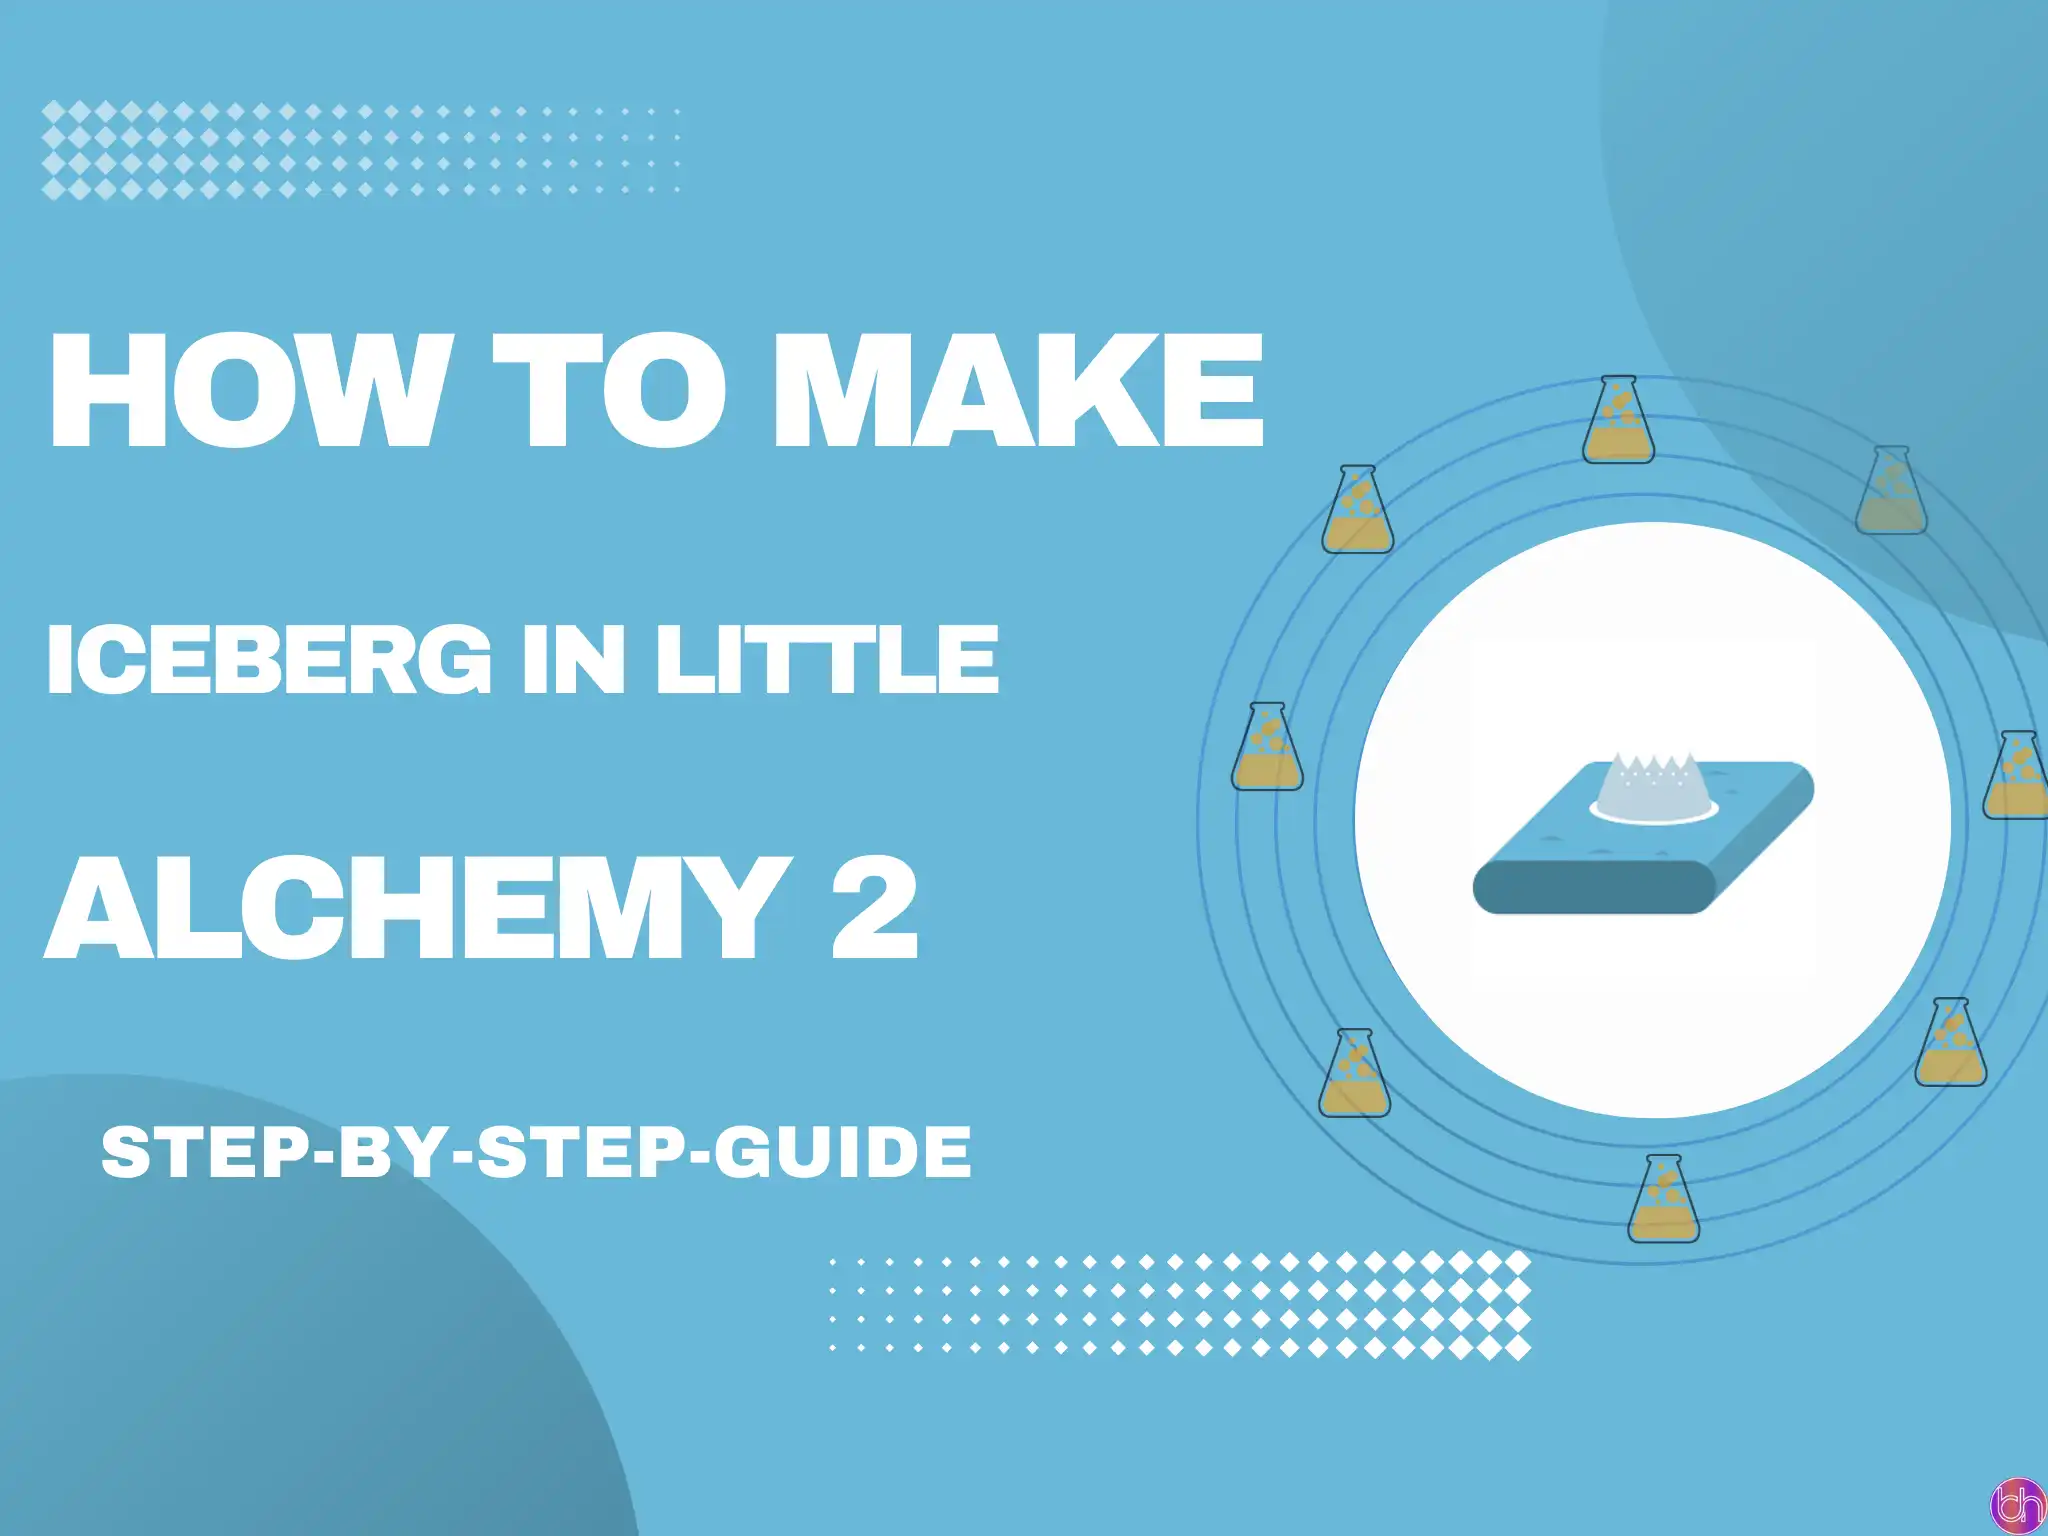 How to make Iceberg in Little Alchemy 2